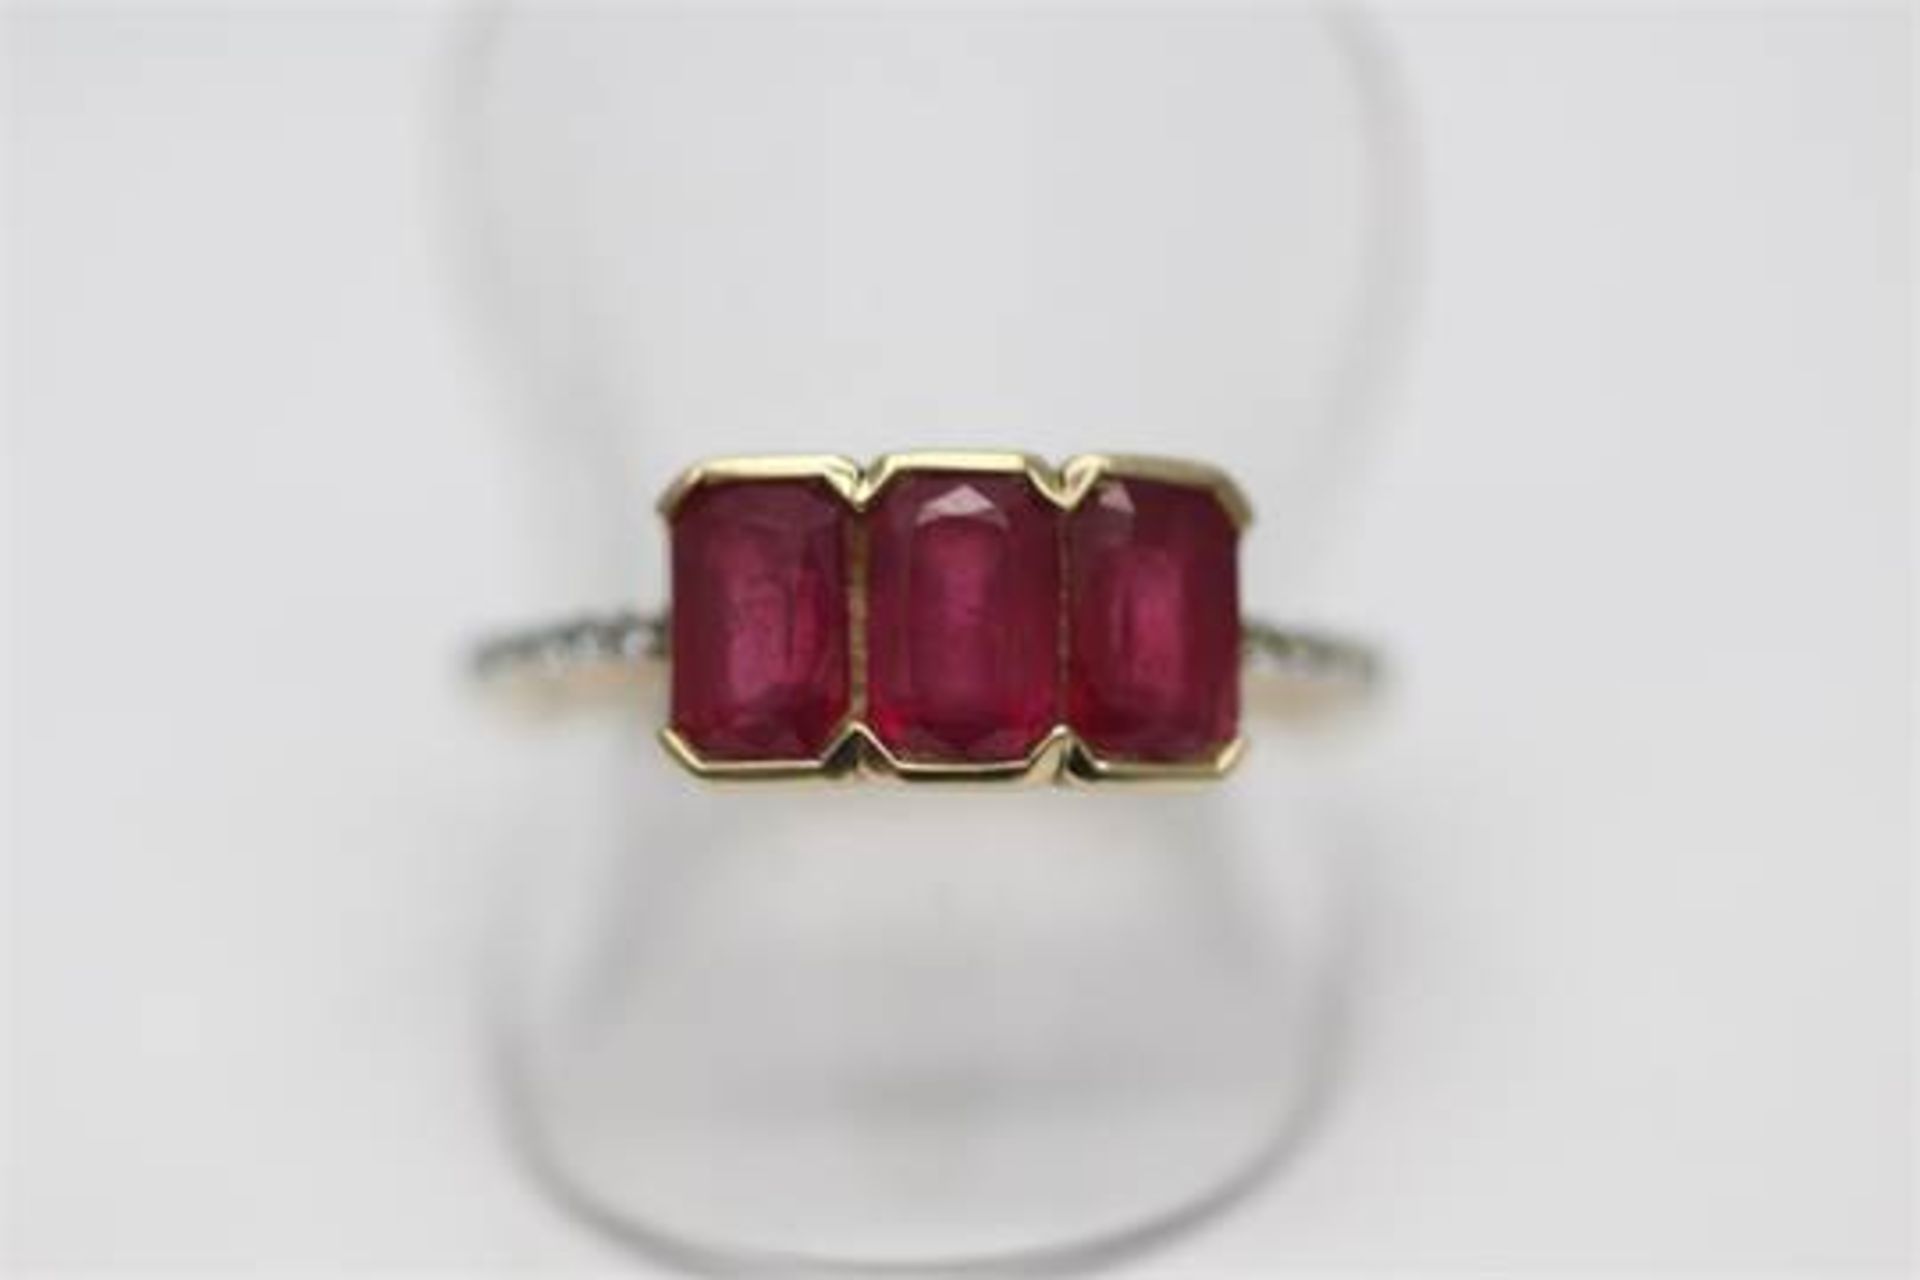 SOLID YELLOW GOLD LADIES RING SET WITH 2.40 CARATS NATURAL RUBY WITH DIAMONDS ALONG SIDE (PV-JH) - Image 3 of 3